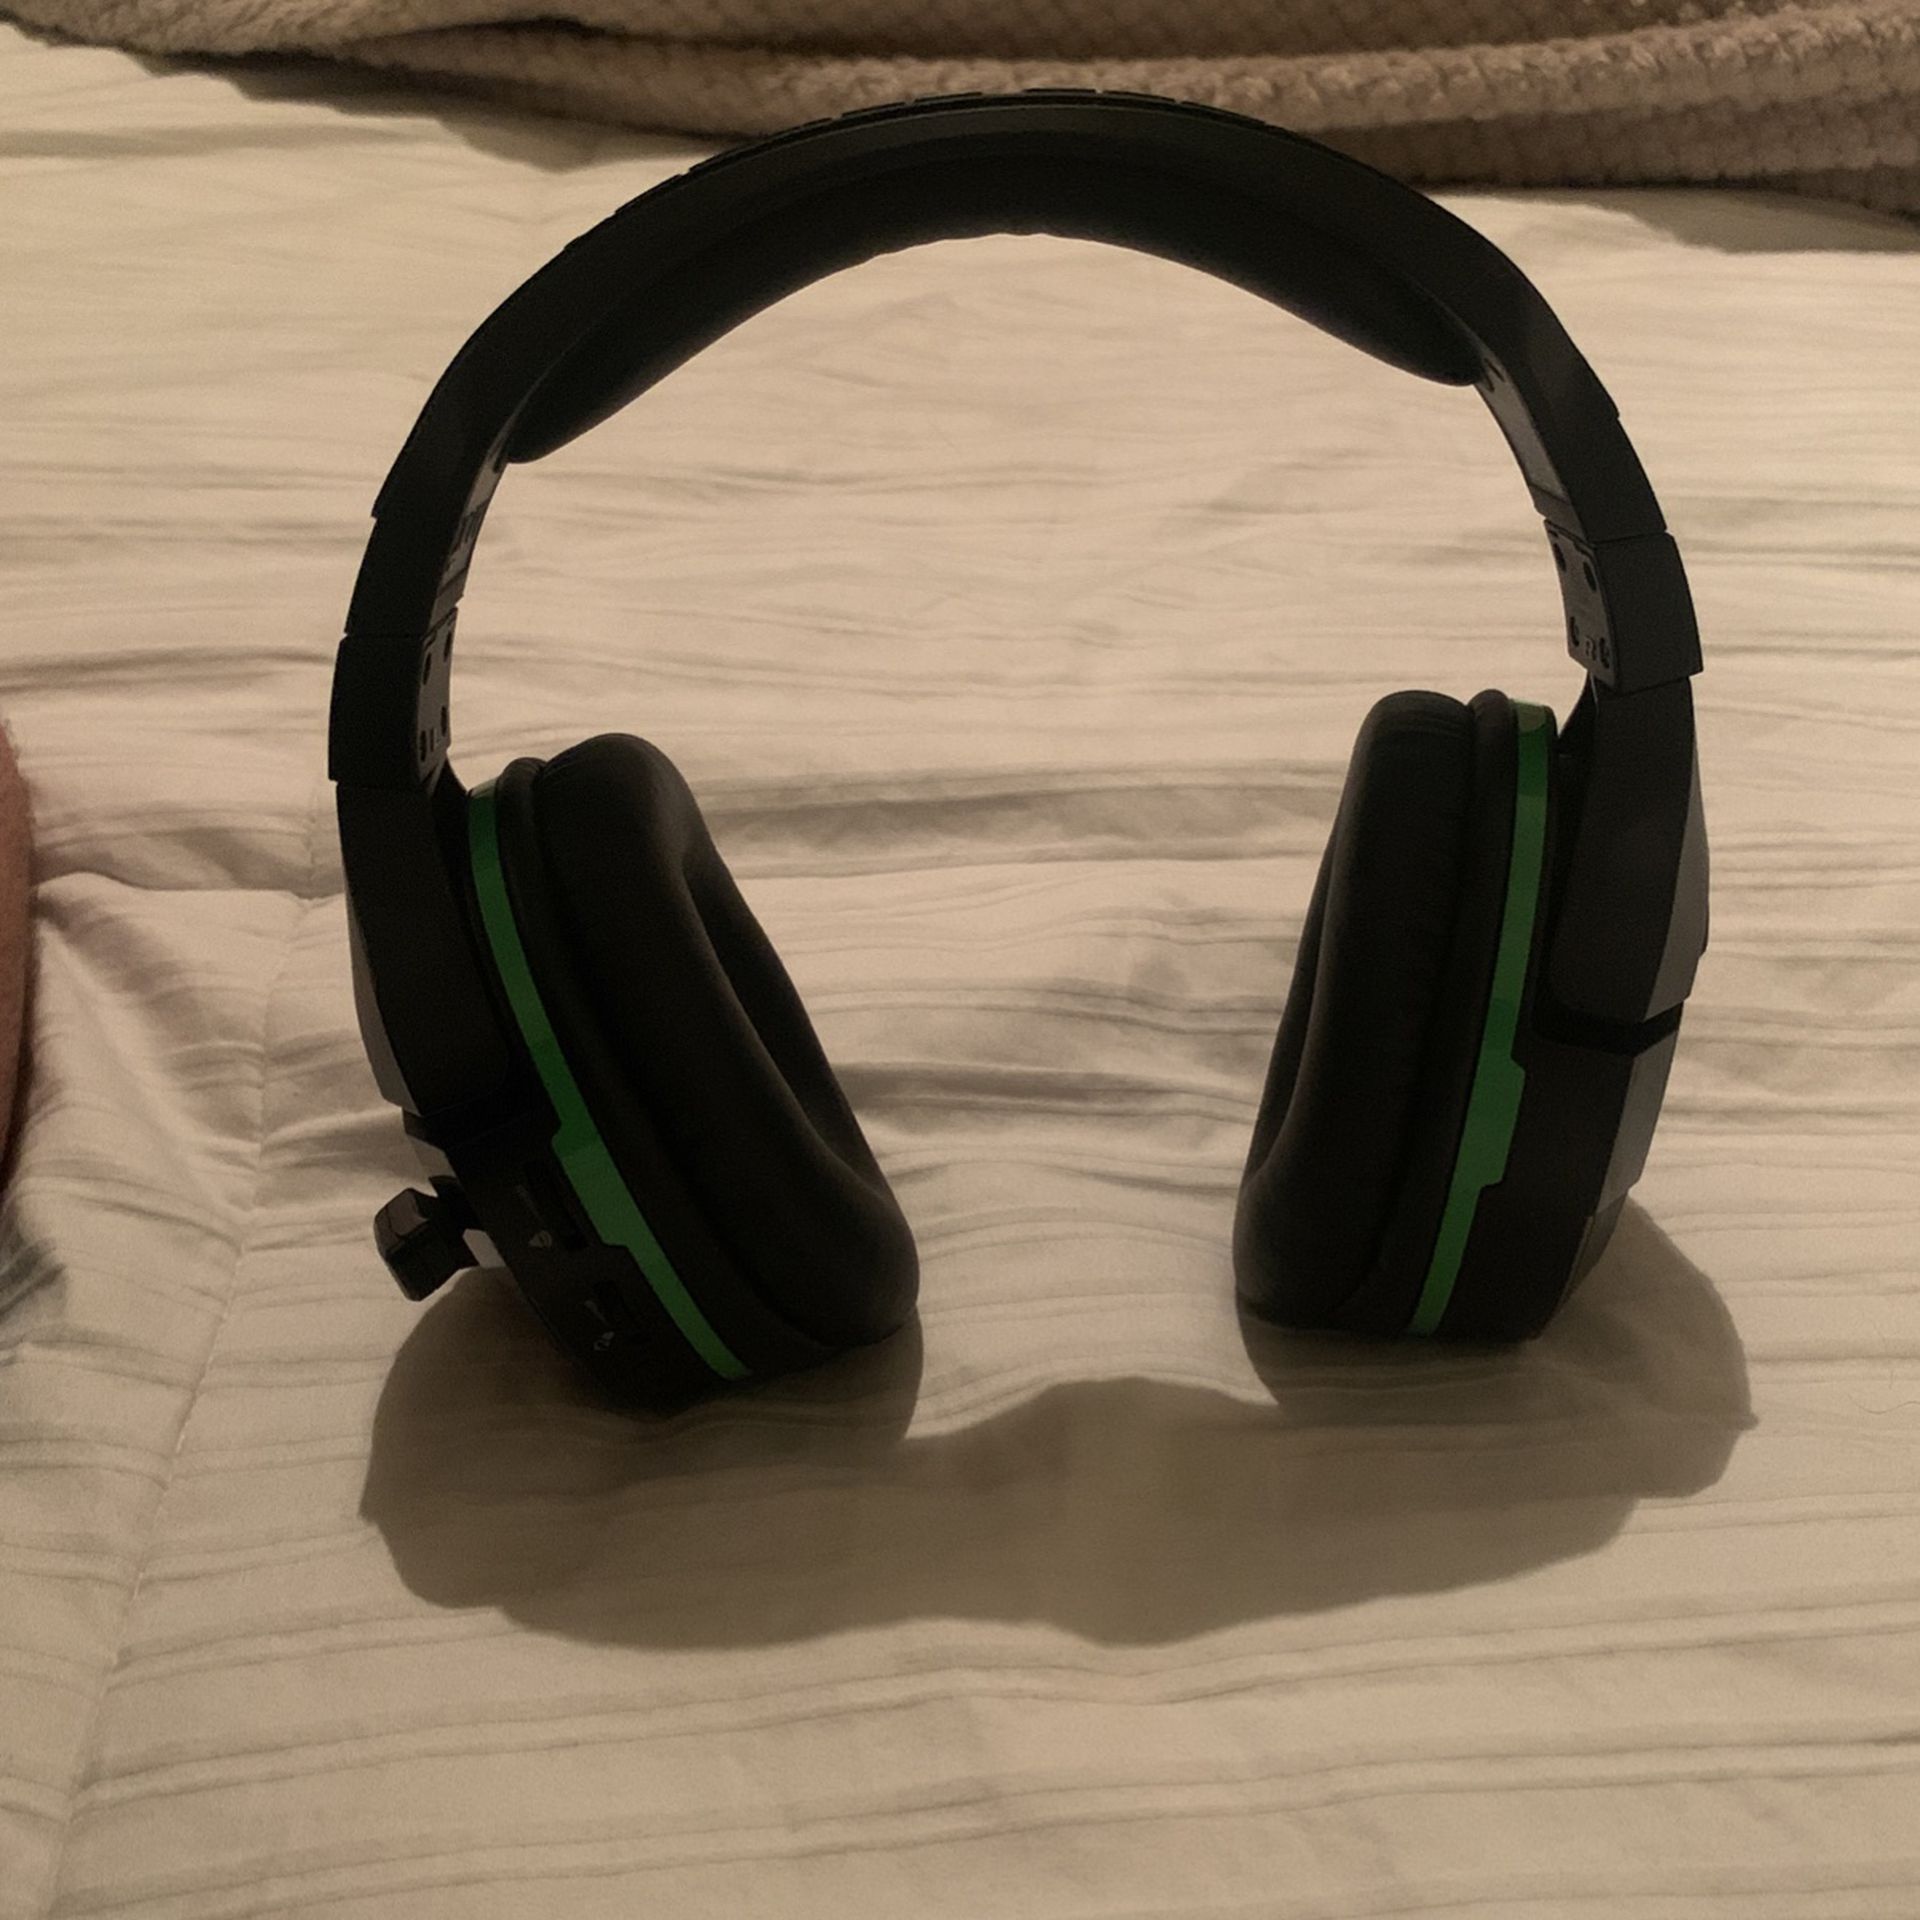 Xbox Turtle Beach Stealth 700- Missing Cord, Works Perfect